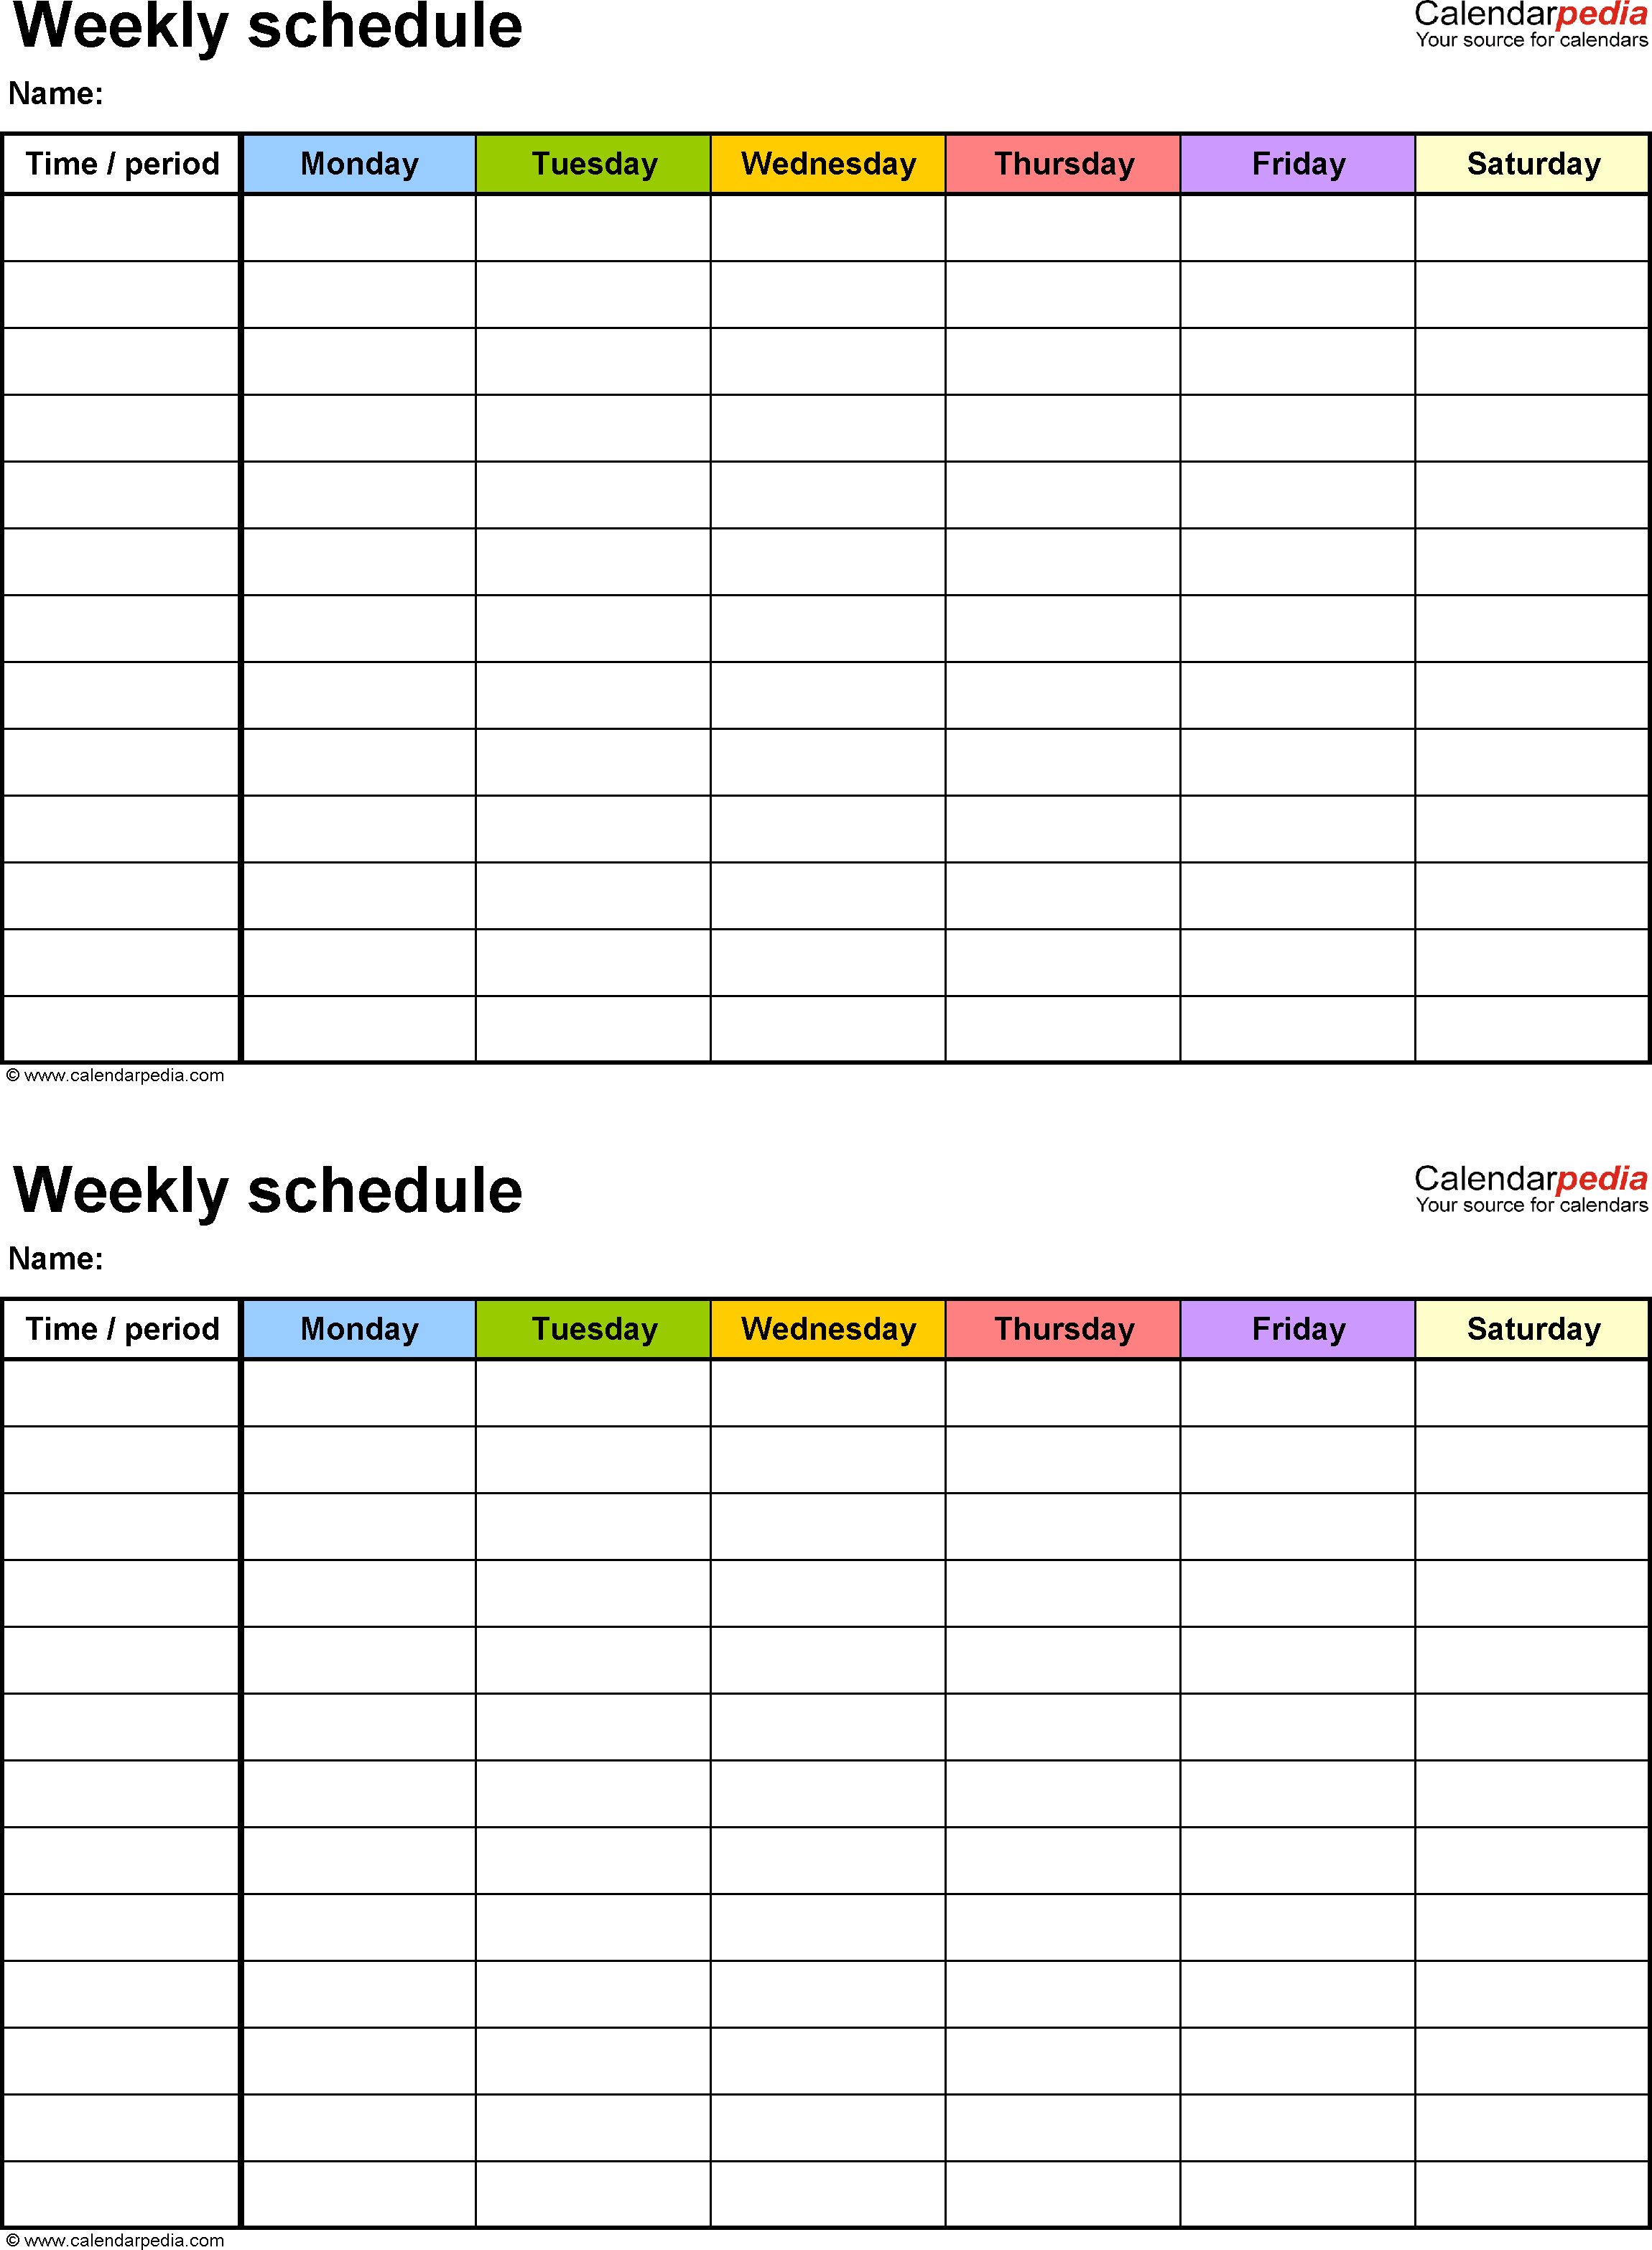 Free Weekly Schedule Templates For Excel  18 Templates pertaining to Look Ahead Schedule Template